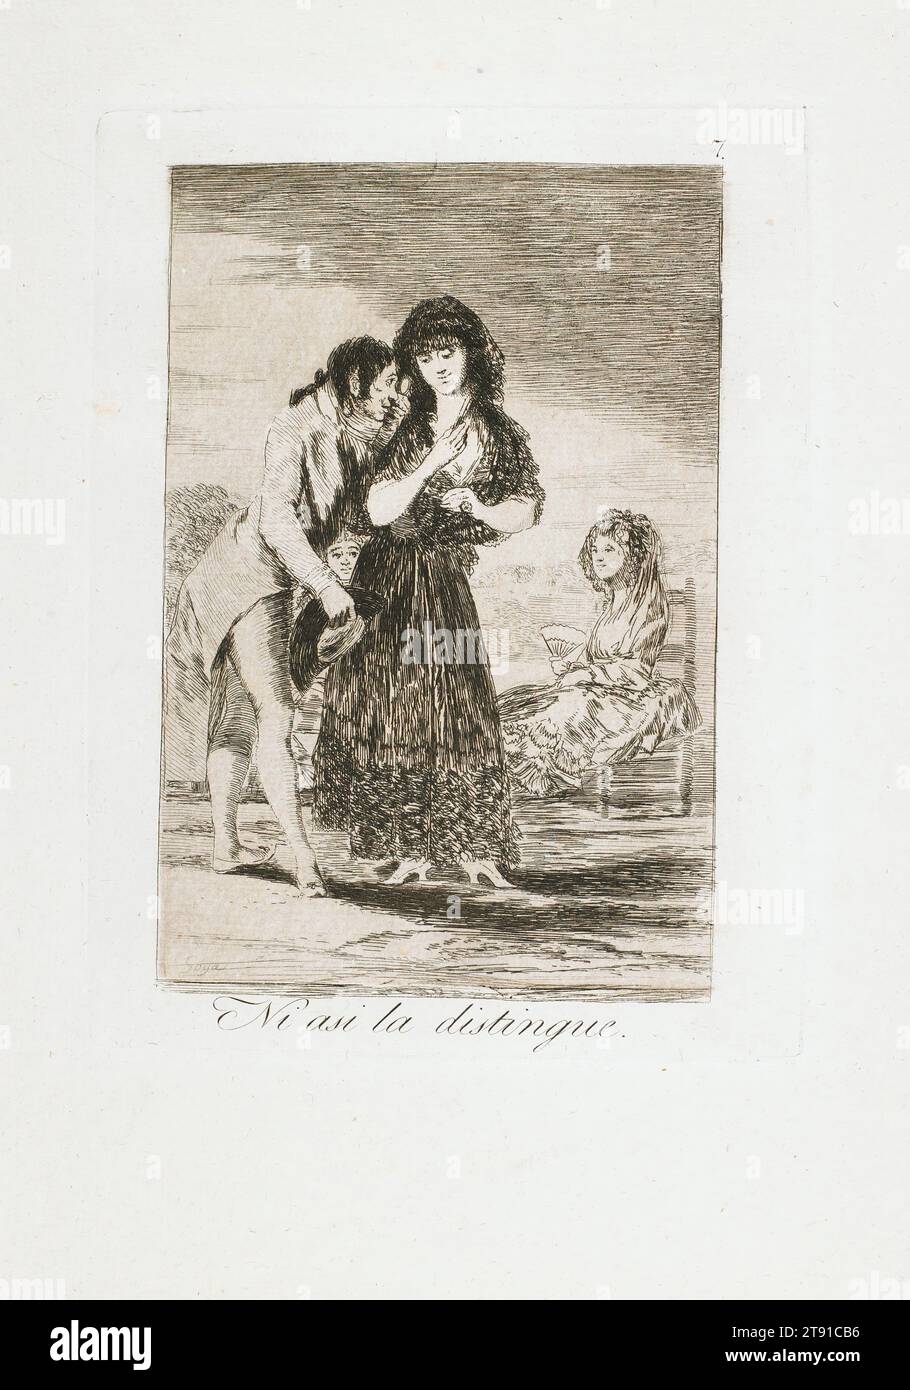 Ni asi la Distingue (Even so he cannot recognize her), from Los Caprichos, 1799, Francisco José de Goya y Lucientes, Spanish, 1746–1828, 7 3/4 x 5 7/8 in. (19.69 x 14.92 cm) (plate)11 1/4 x 7 13/16 in. (28.58 x 19.84 cm) (sheet), Etching, aquatint, and drypoint, Spain, 18th century, In 1793, an illness left Spanish court painter, Francisco Goya profoundly deaf, a condition that may have liberated him to explore unconventional subjects in his art. A few years later, he published Los Caprichos, a set of 80 etchings and aquatints that delved into prostitution, superstition, religious exploitation Stock Photo